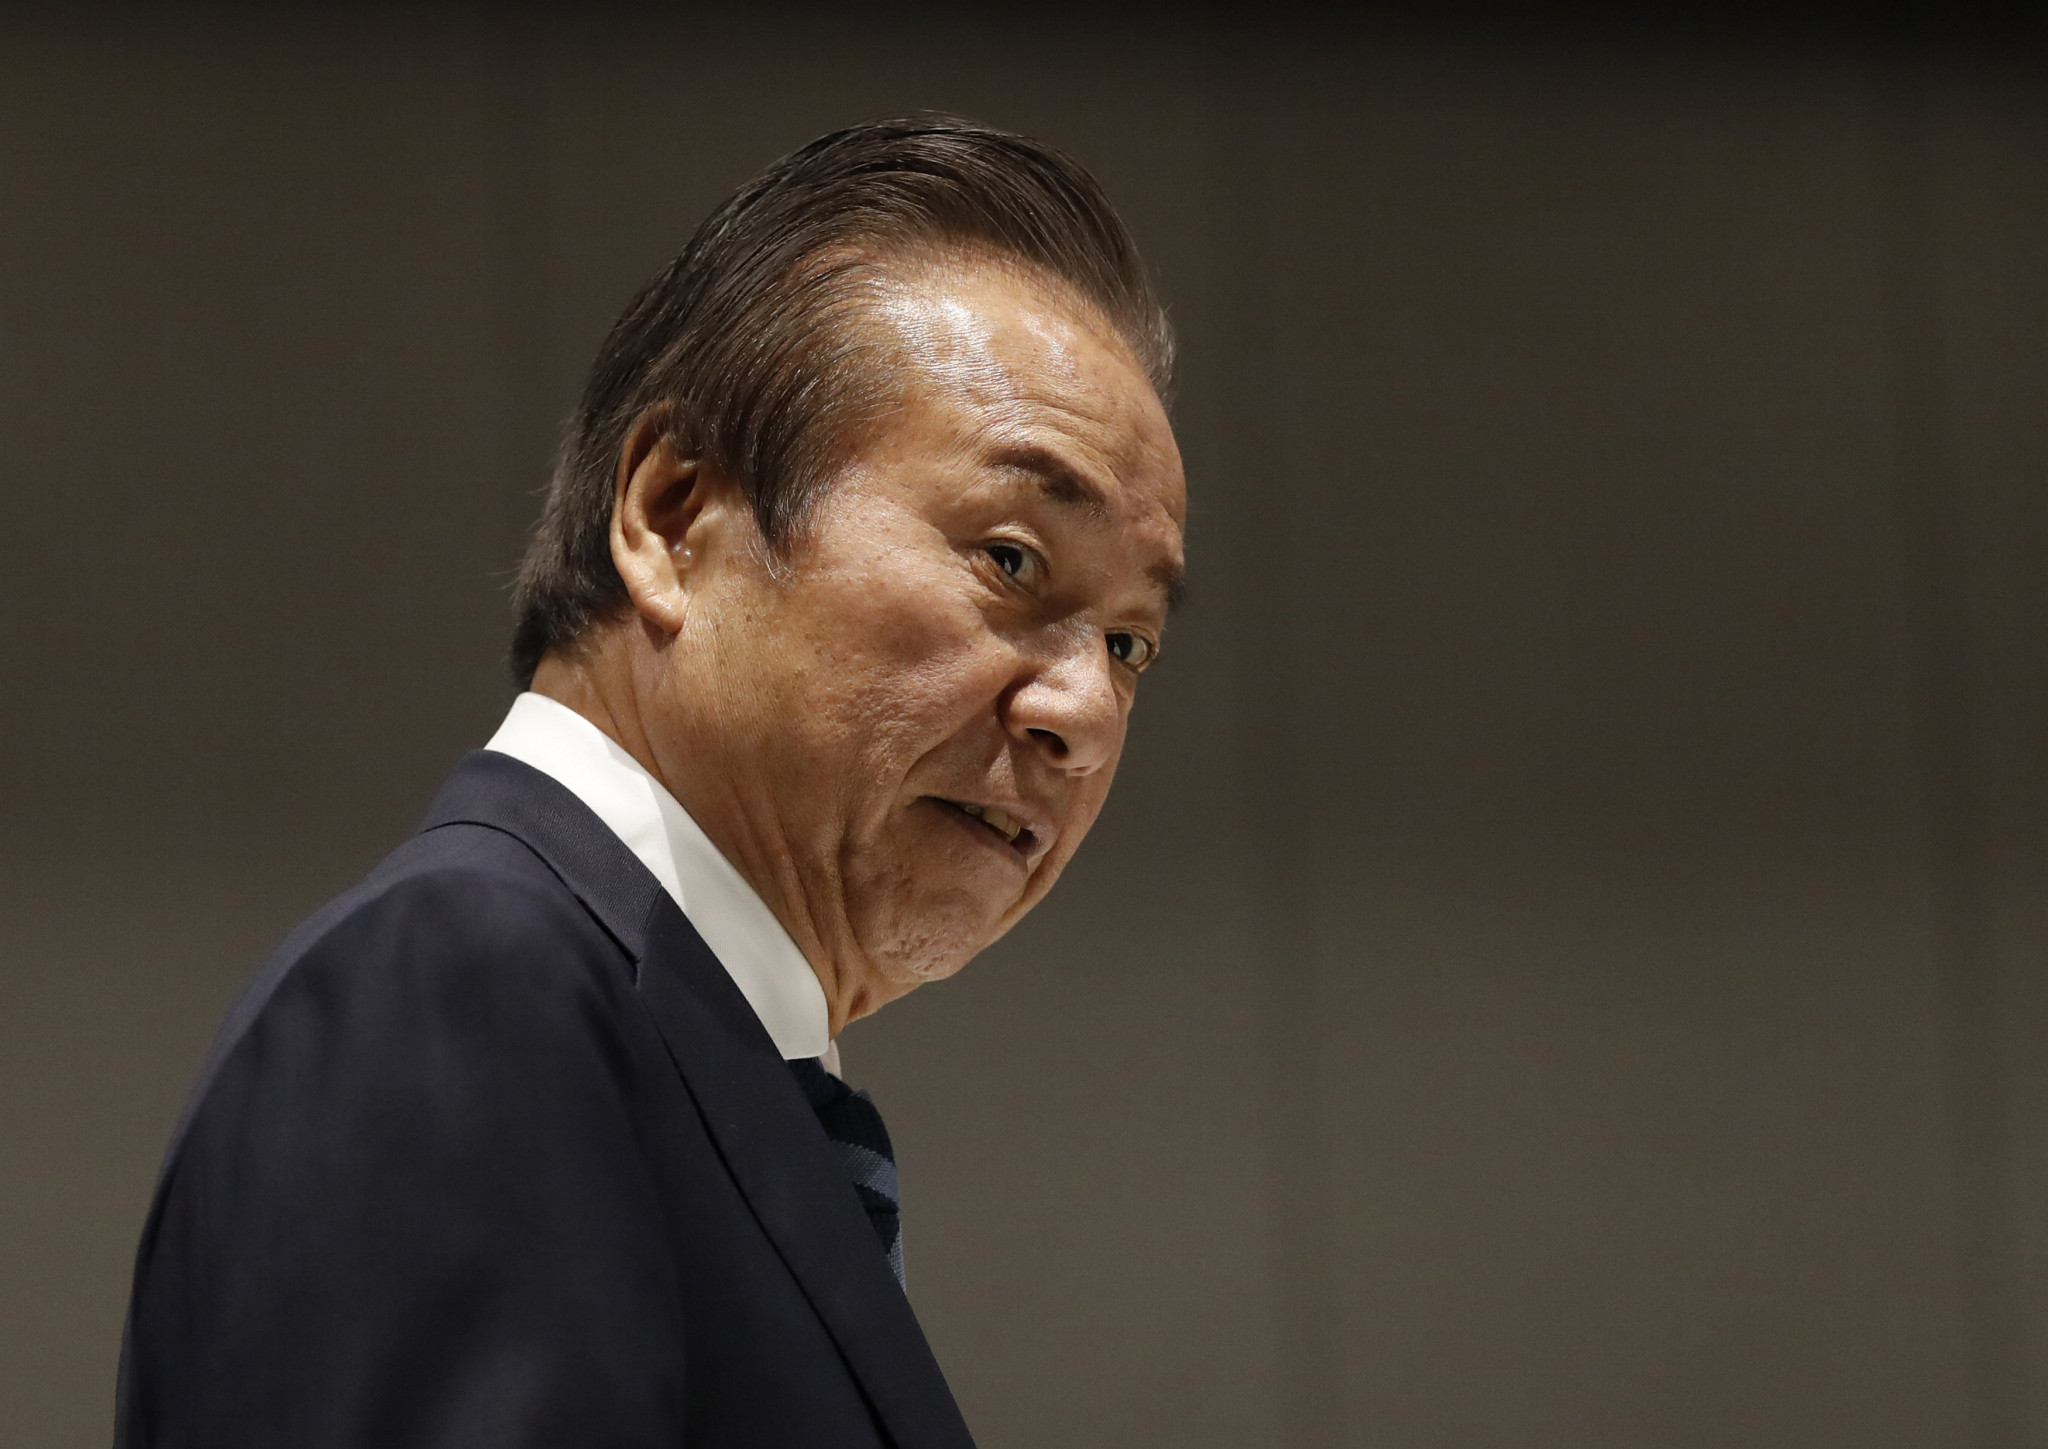 Takahashi faces fourth charge in relation to growing Tokyo 2020 bribery scandal